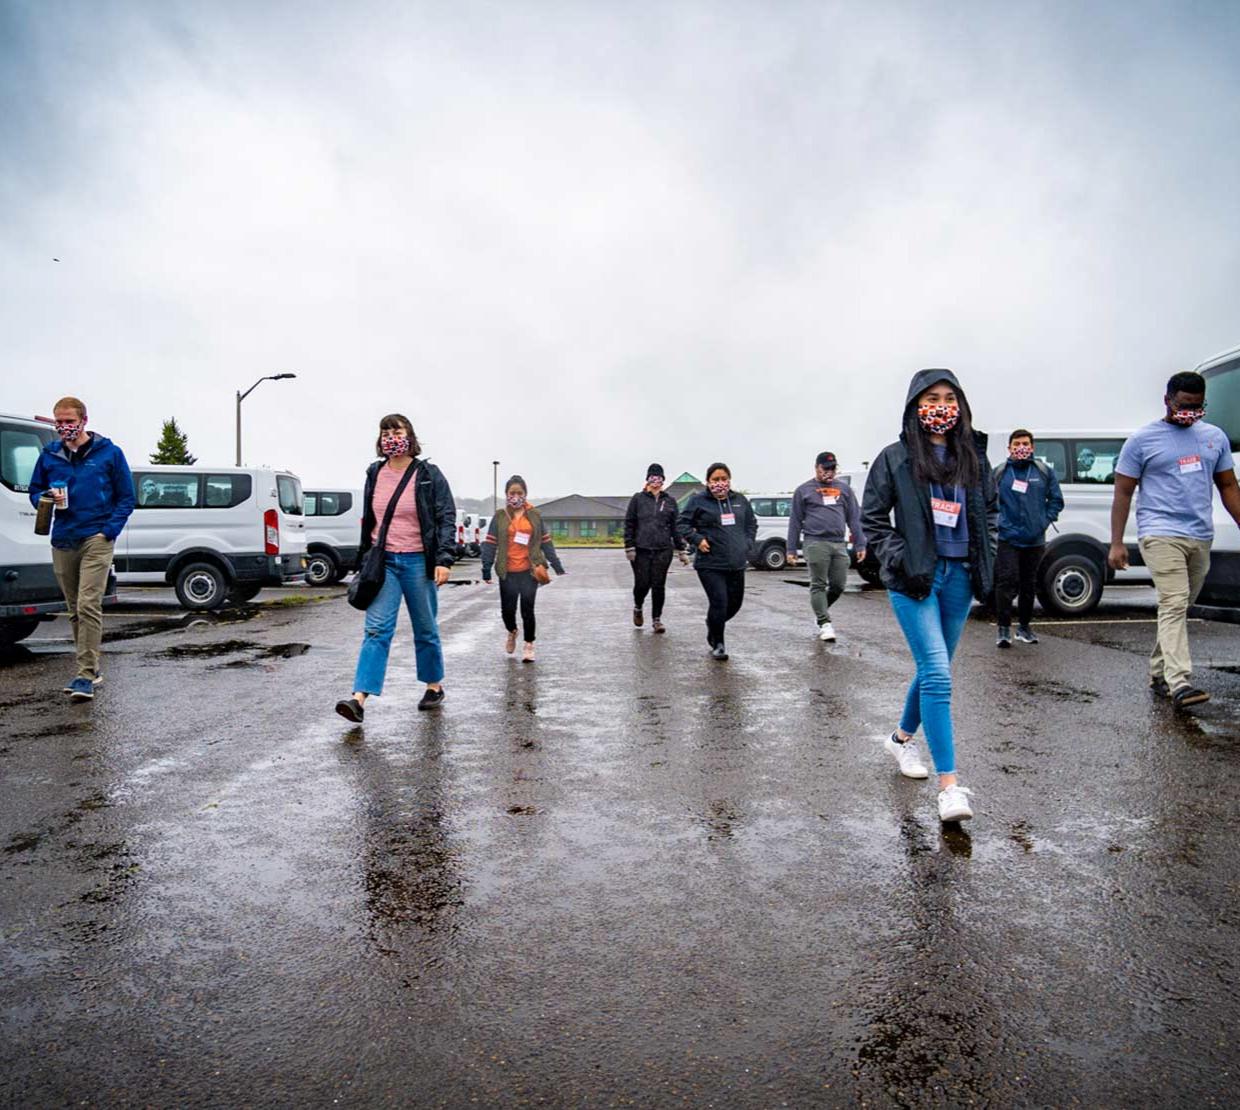 TRACE field staff walking along parking lot in Newport, Oregon on a cloudy and rainy day.